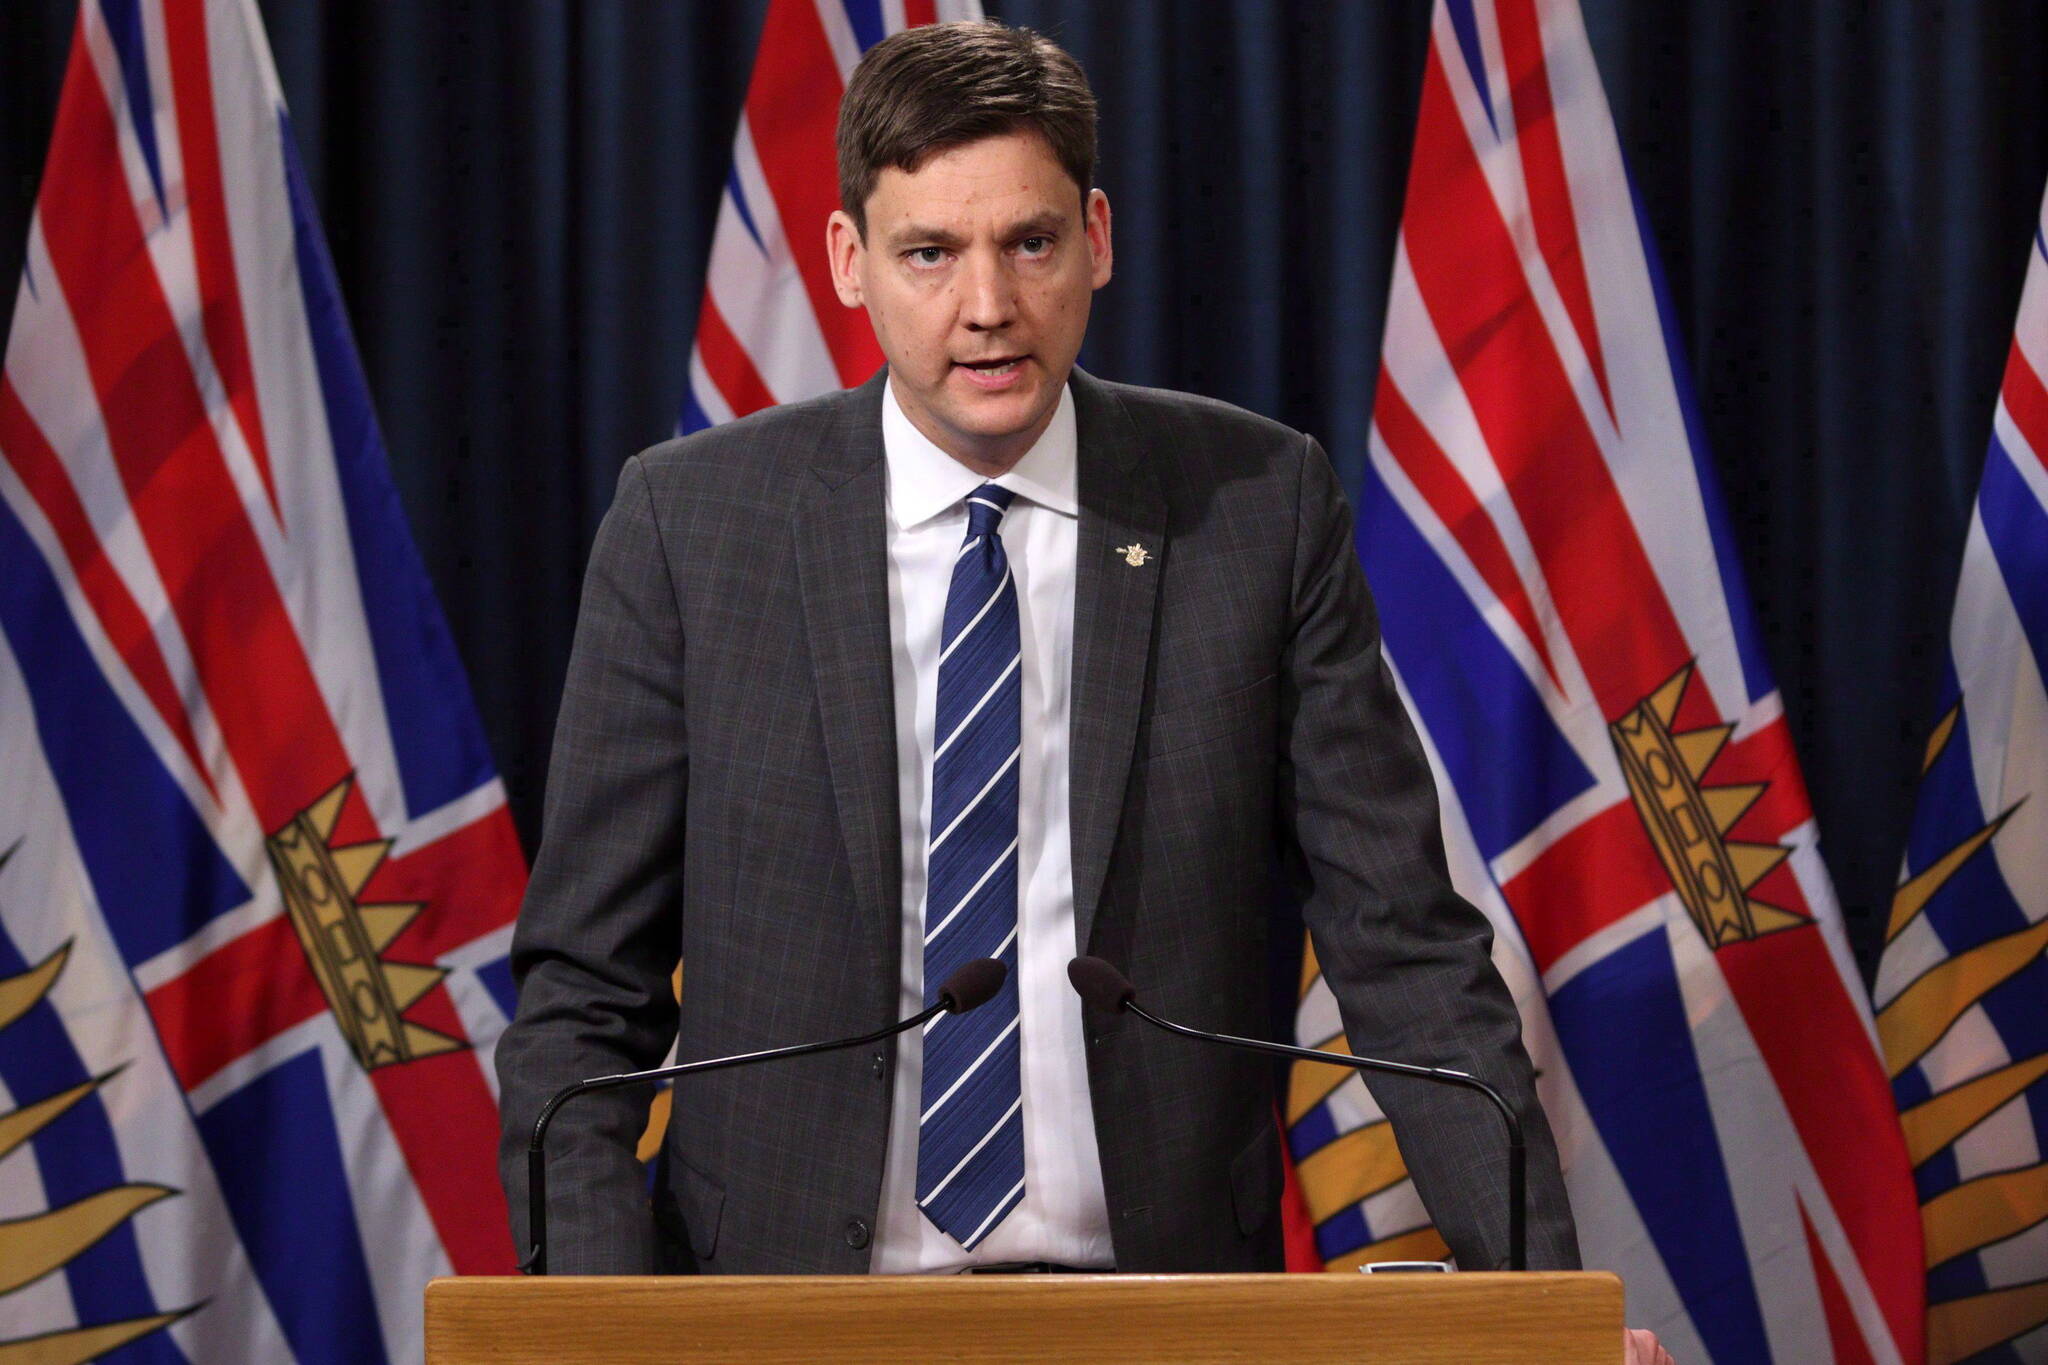 Premier David Eby says a yet-to-be named independent person will look into why the suspect in the recent Chinatown stabbings was out on day parole. (THE CANADIAN PRESS/Chad Hipolito)